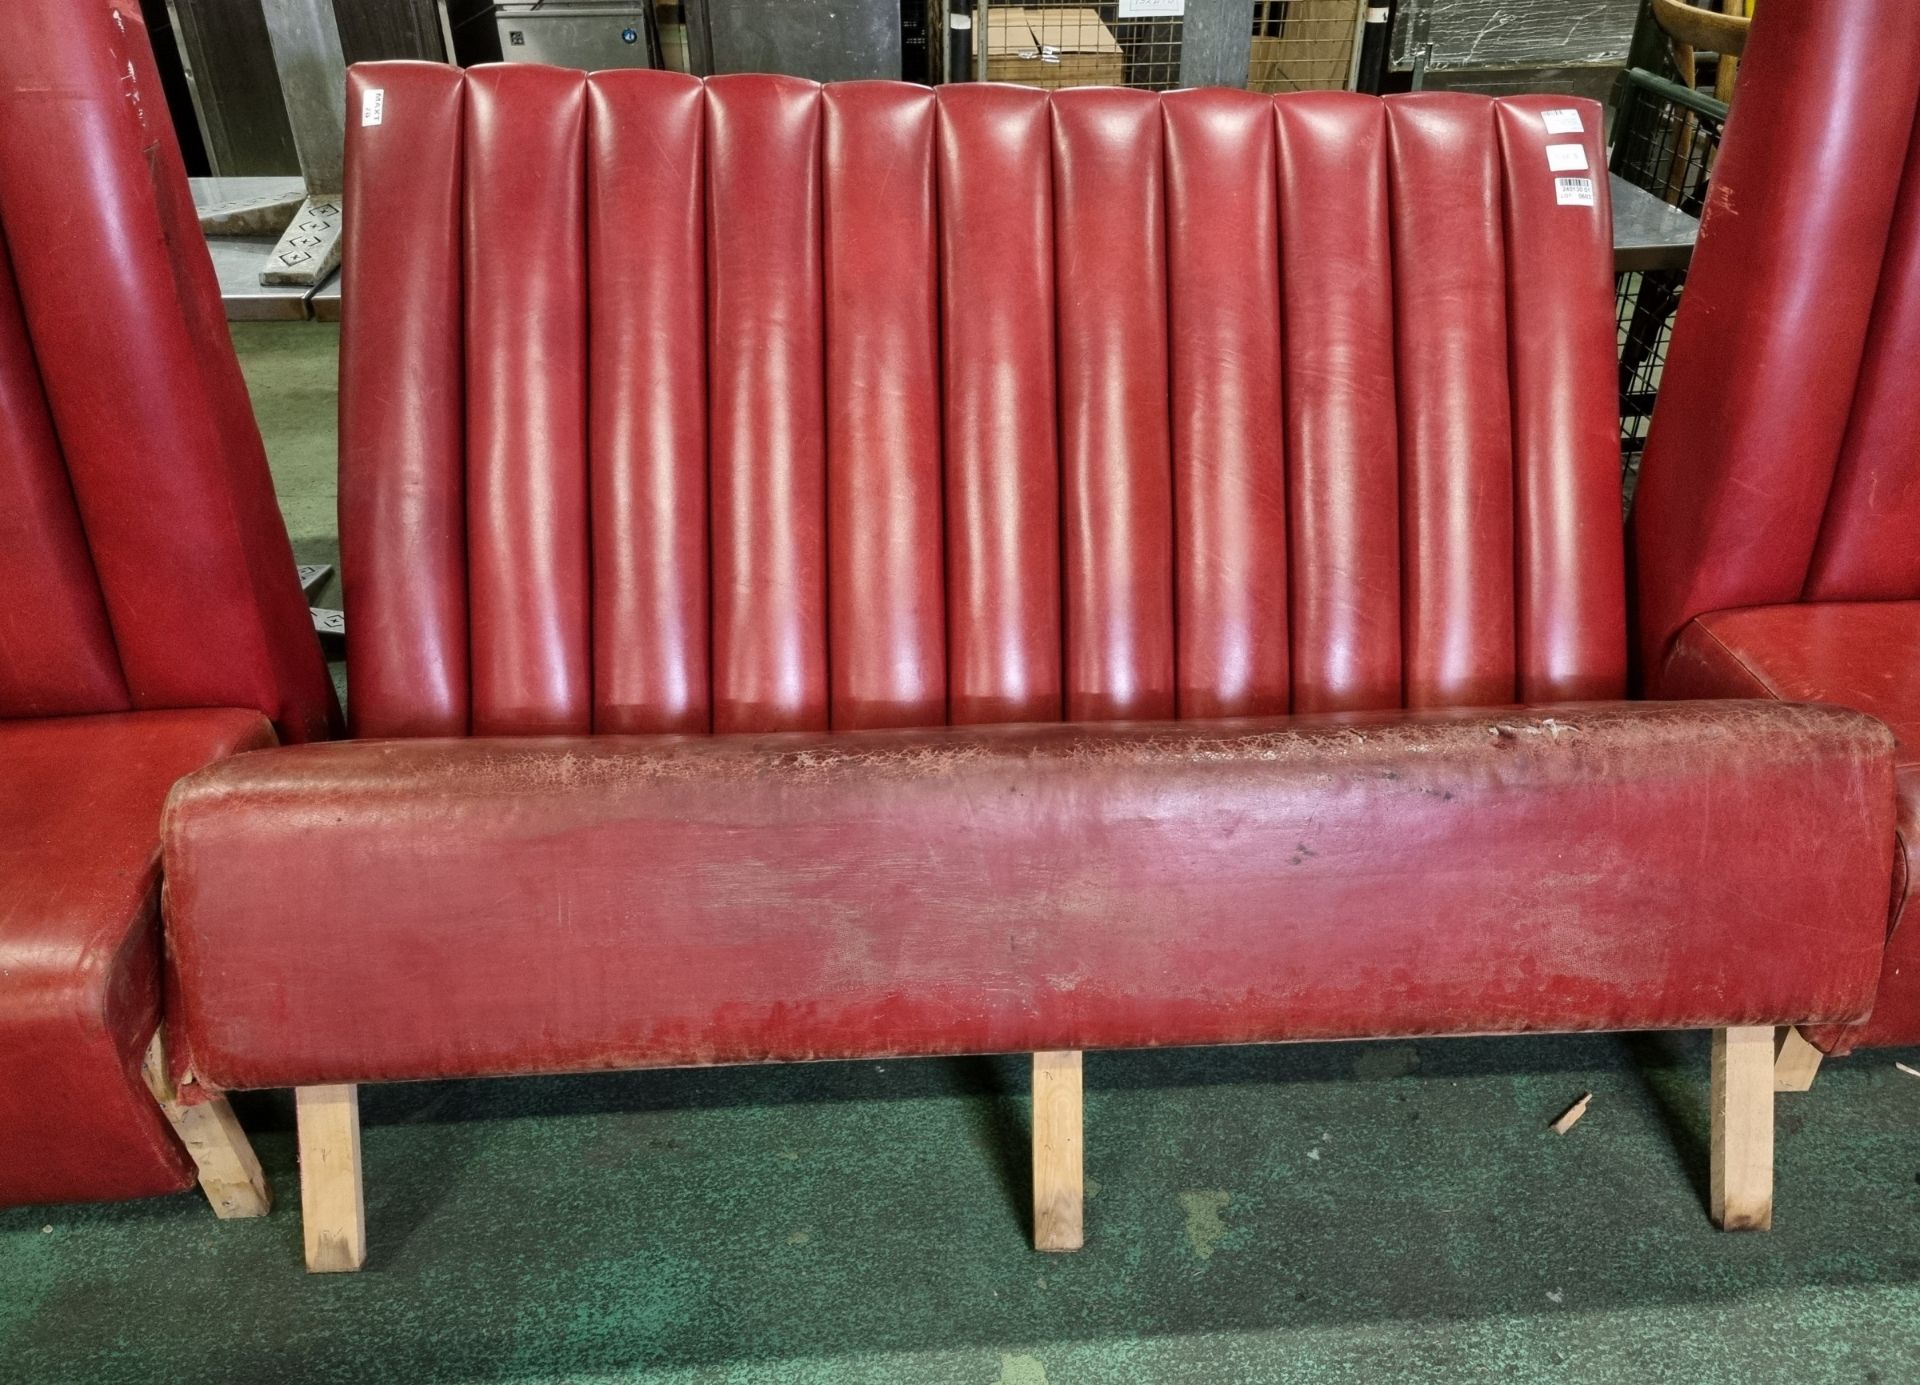 Red leather padded bench seating - Image 3 of 6